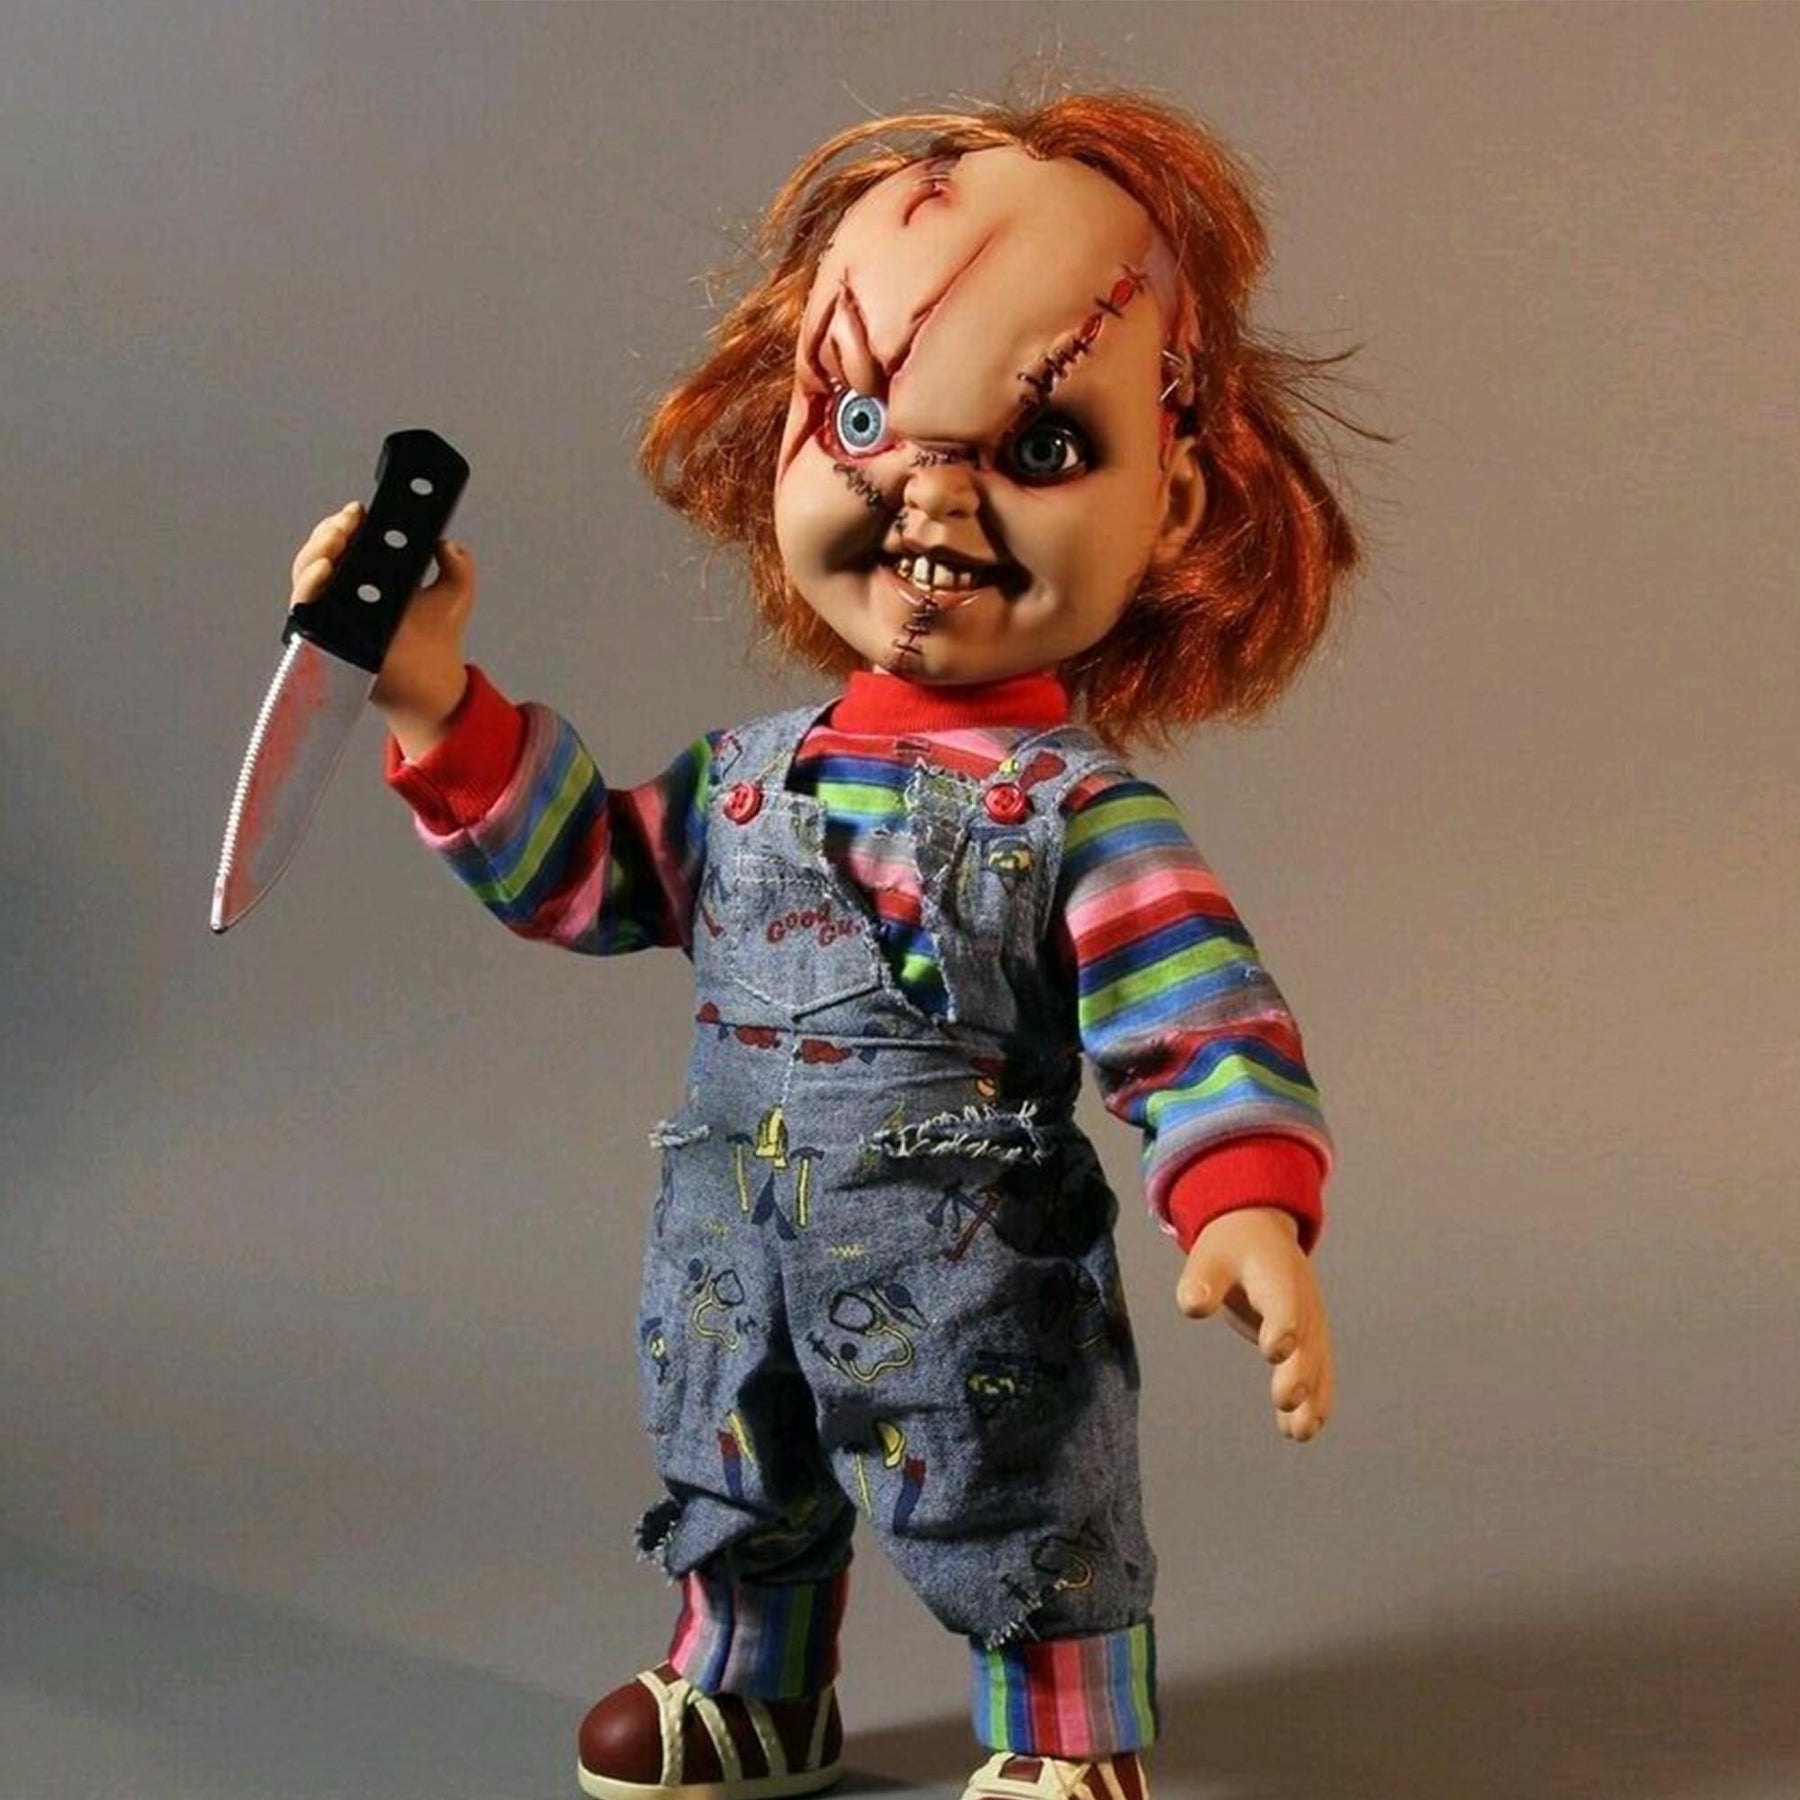 Child's Play 15" Chucky Talking Action Figure